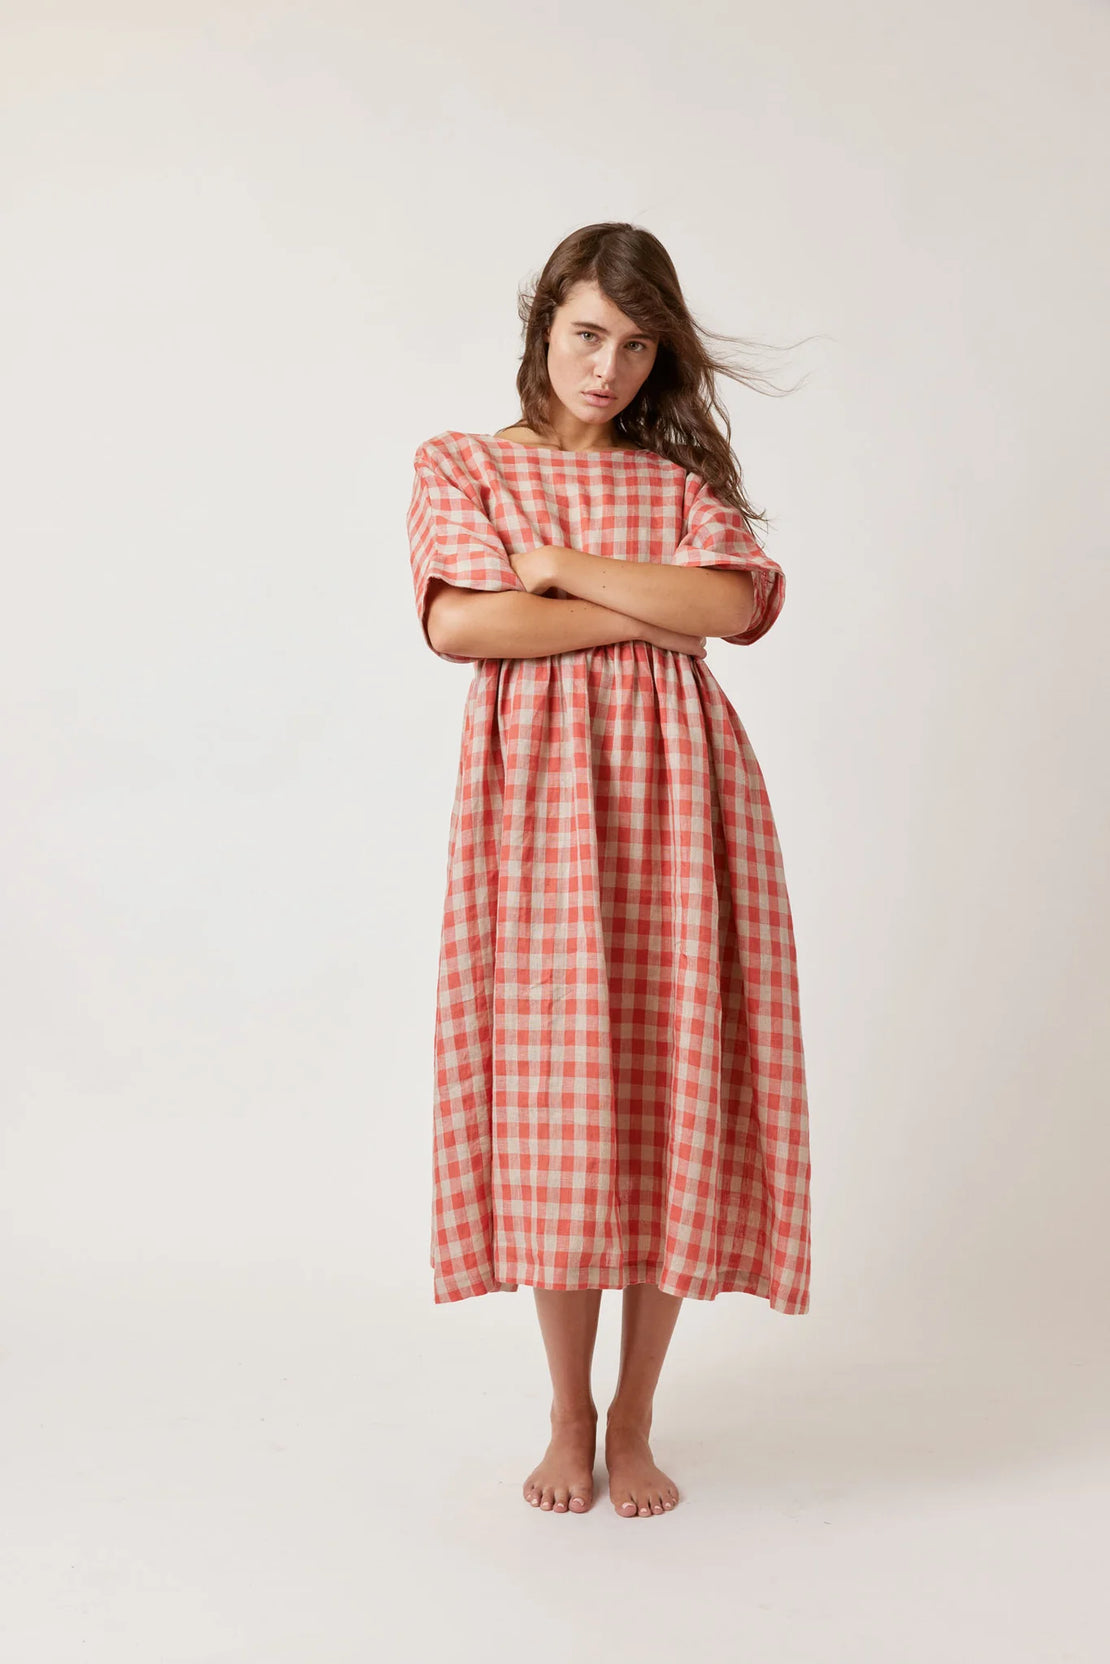 Drop Sleeve Loose Fit Linen Dress - Persimmon - Amente - STAG Provisions - W - Onepiece - Dress